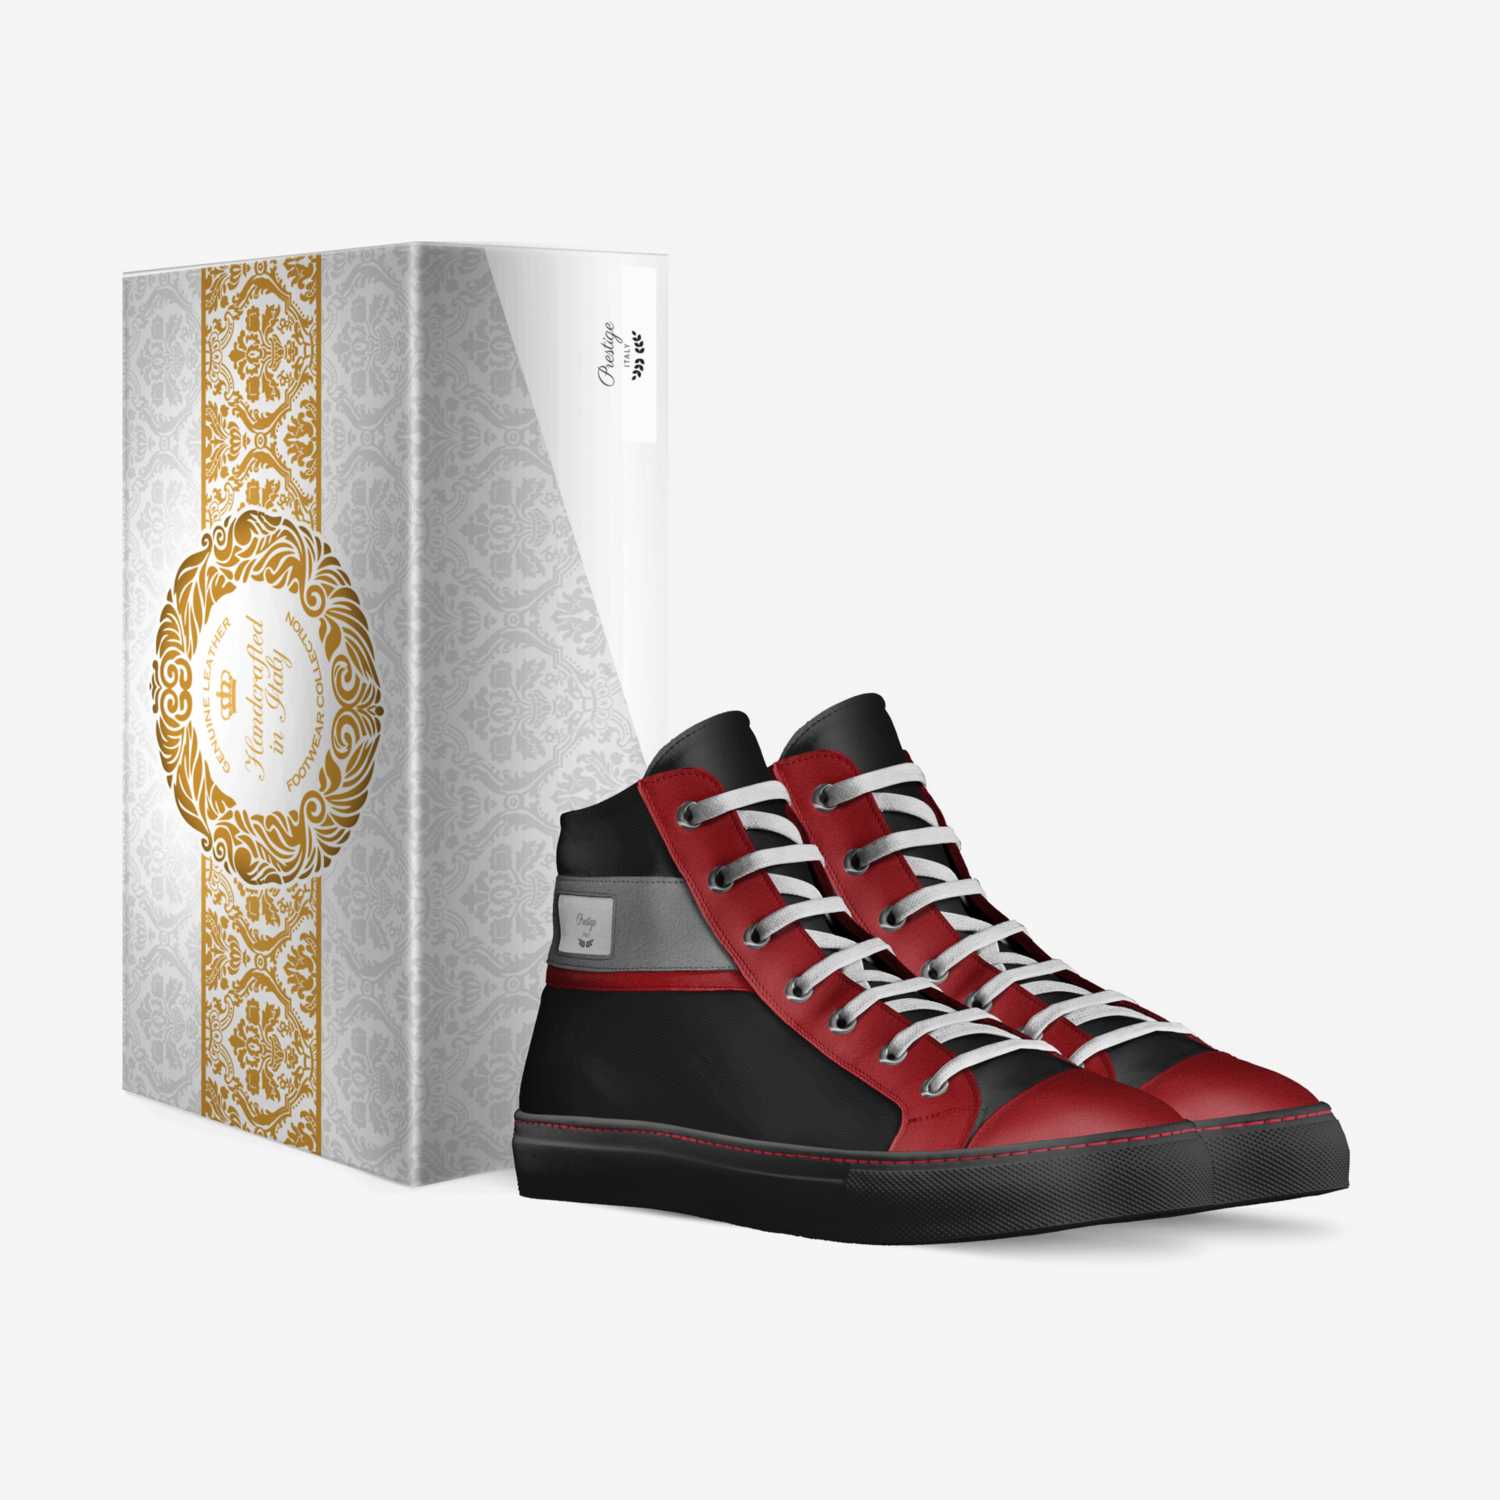 Ascend custom made in Italy shoes by John Linzie | Box view